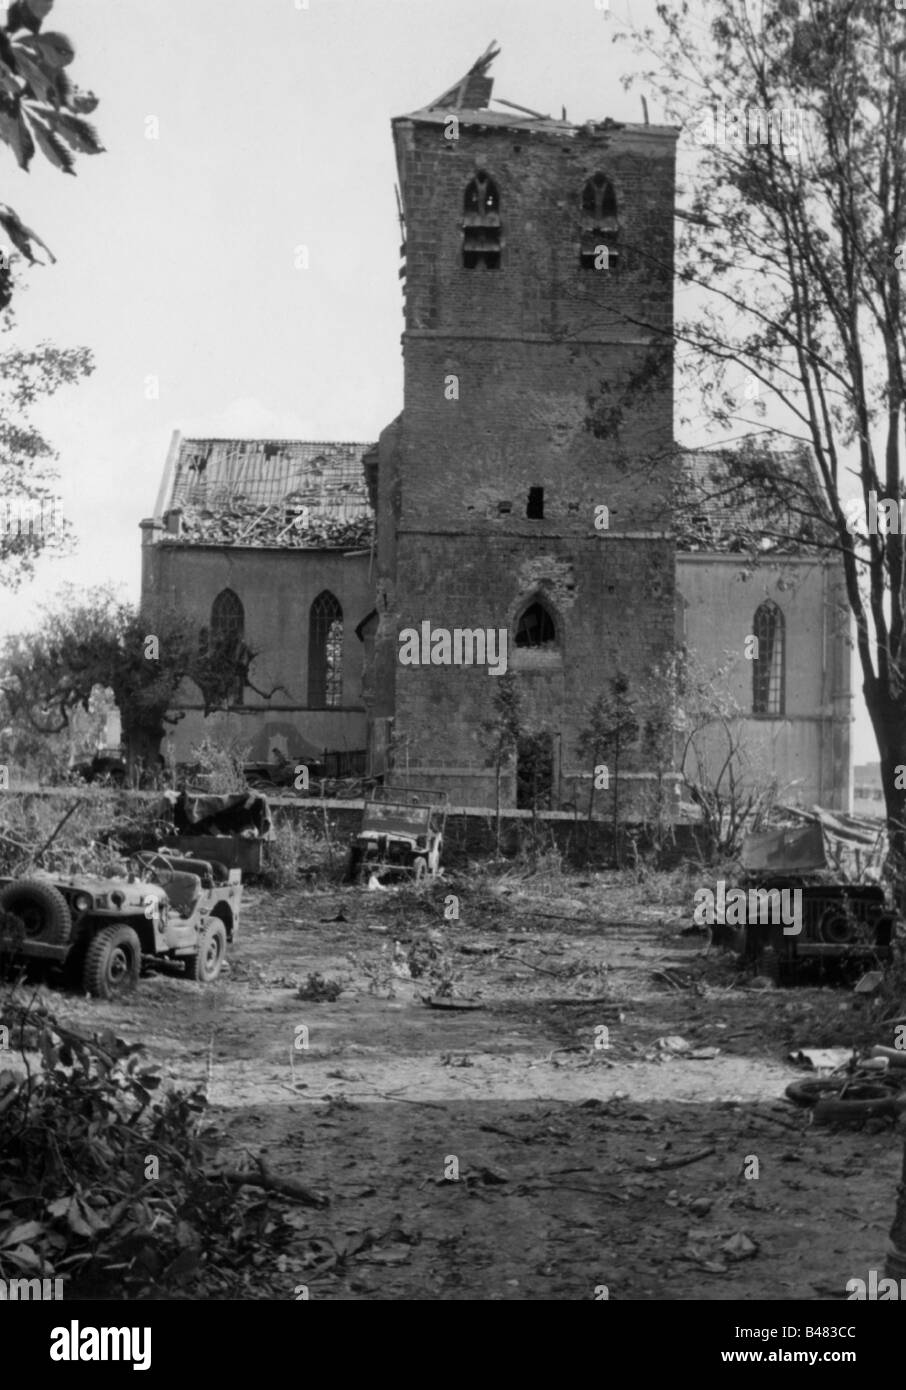 events, Second World War / WWII, Netherlands, Arnhem, 17. - 25.9.1944, destroyed Old Church on the Benedendorpsweg in Oosterbeek, in front of it abandoned jeeps of the 1st British Airborne Division (General Urquhart), 25./26.9.1944, Stock Photo